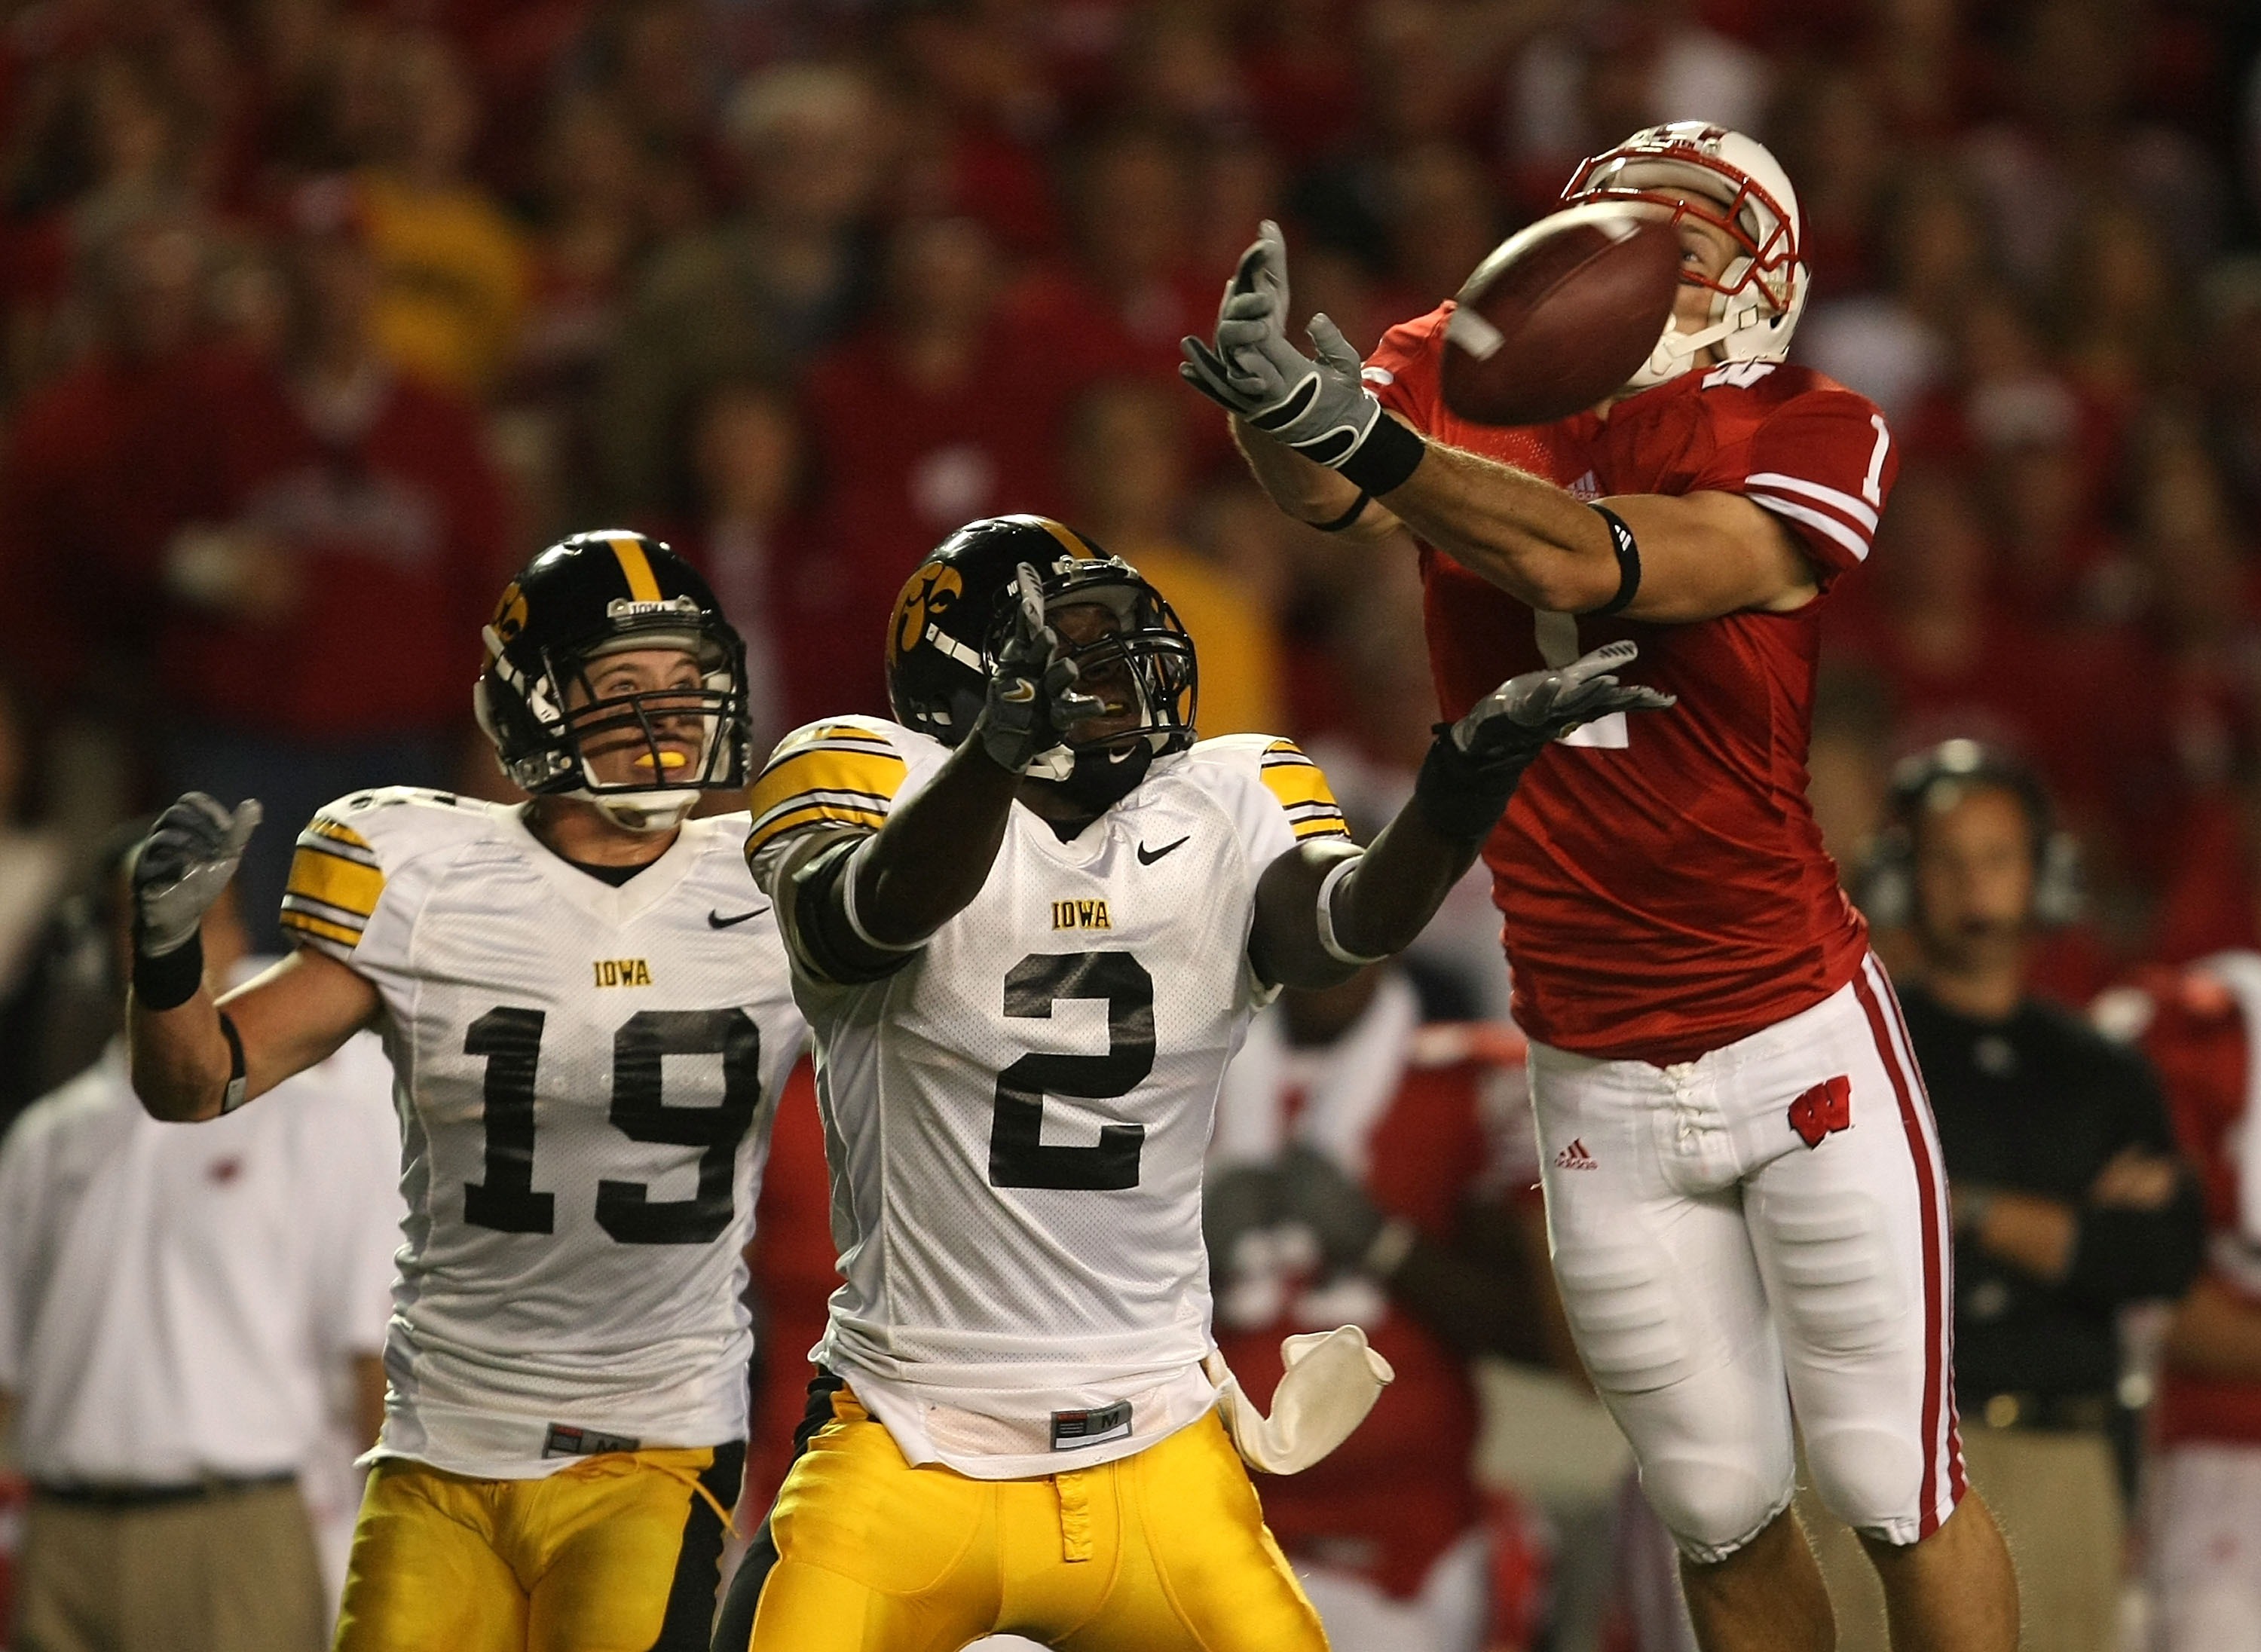 MADISON, WI - SEPTEMBER 22:  Luke Swan #1 of the Wisconsin Badgers misses a catch as Harold Dalton #2 and Adam Shada #19 of the Iowa Hawkeyes defend at Camp Randall Stadium September 22, 2007 in Madison, Wisconsin.  (Photo by Jonathan Daniel/Getty Images)